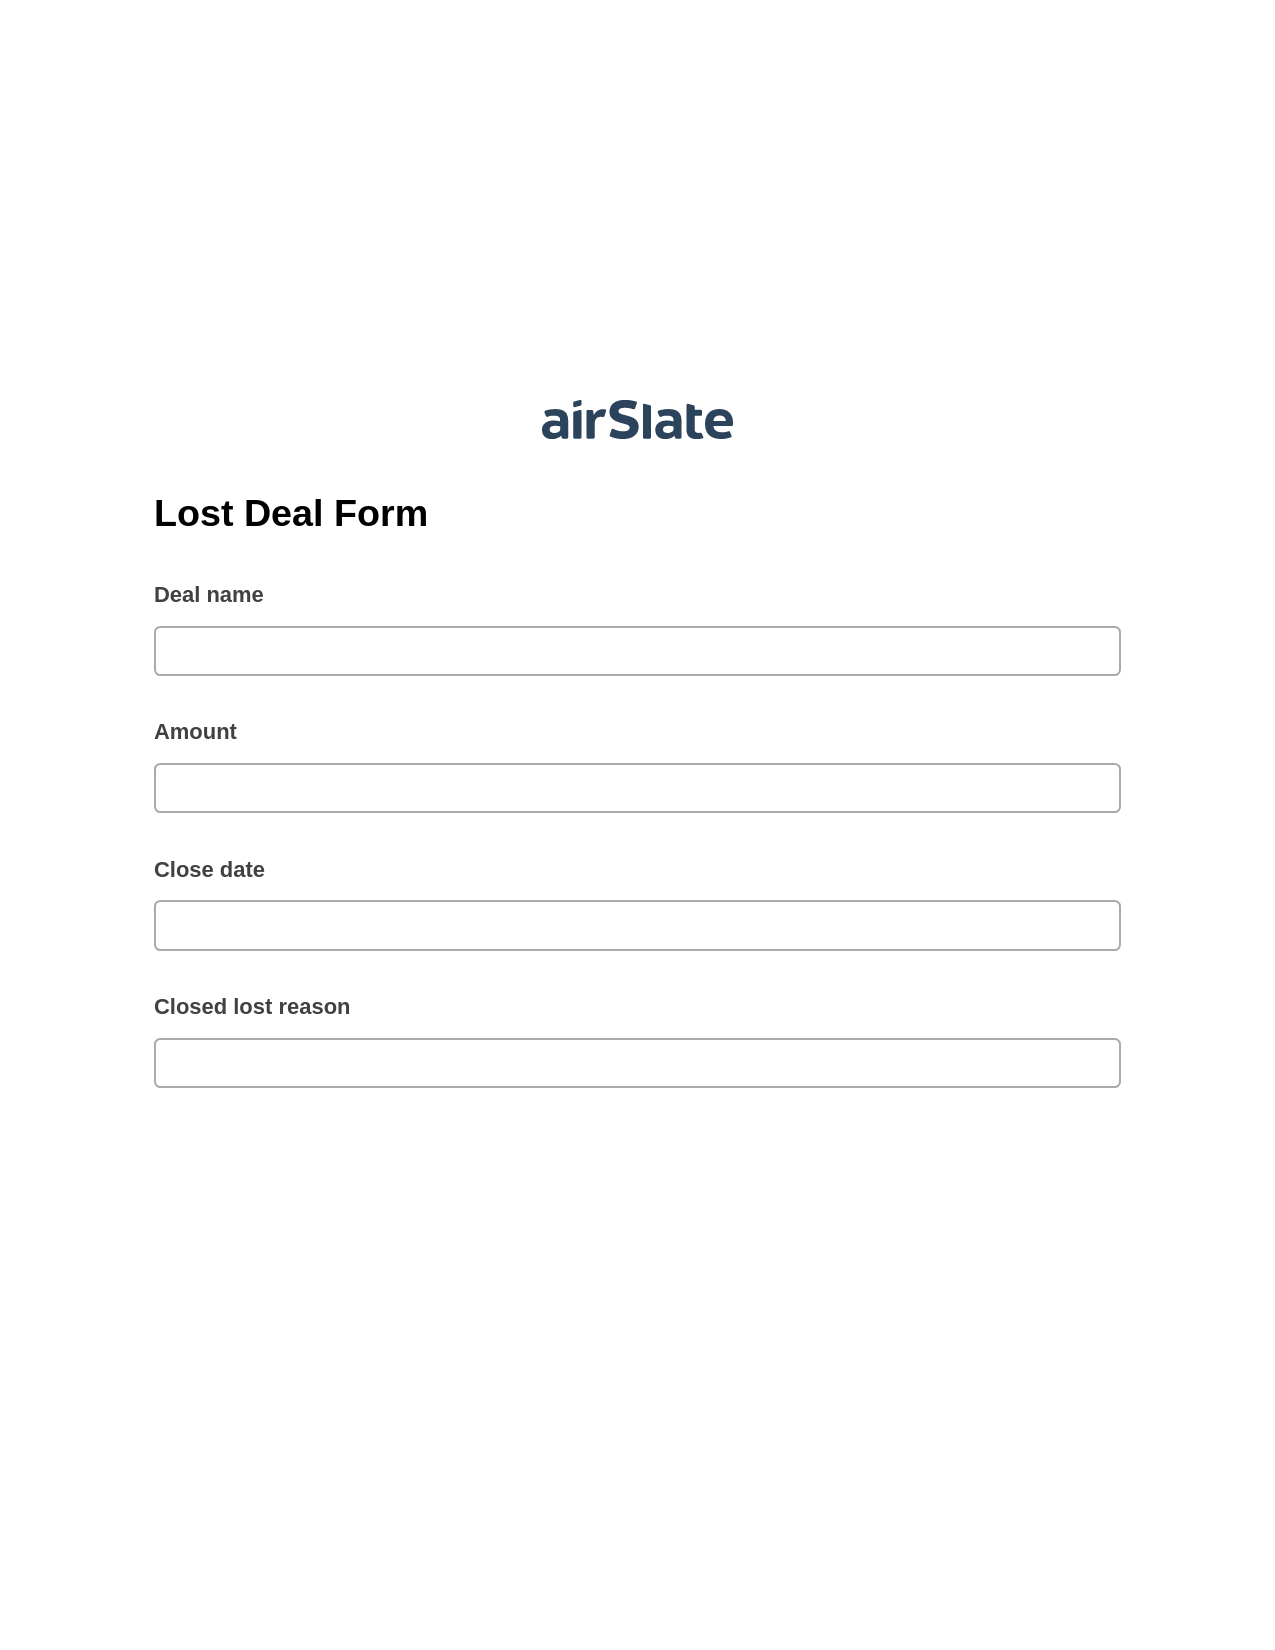 Lost Deal Form Prefill from NetSuite records, Hide Signatures Bot, Export to Excel 365 Bot